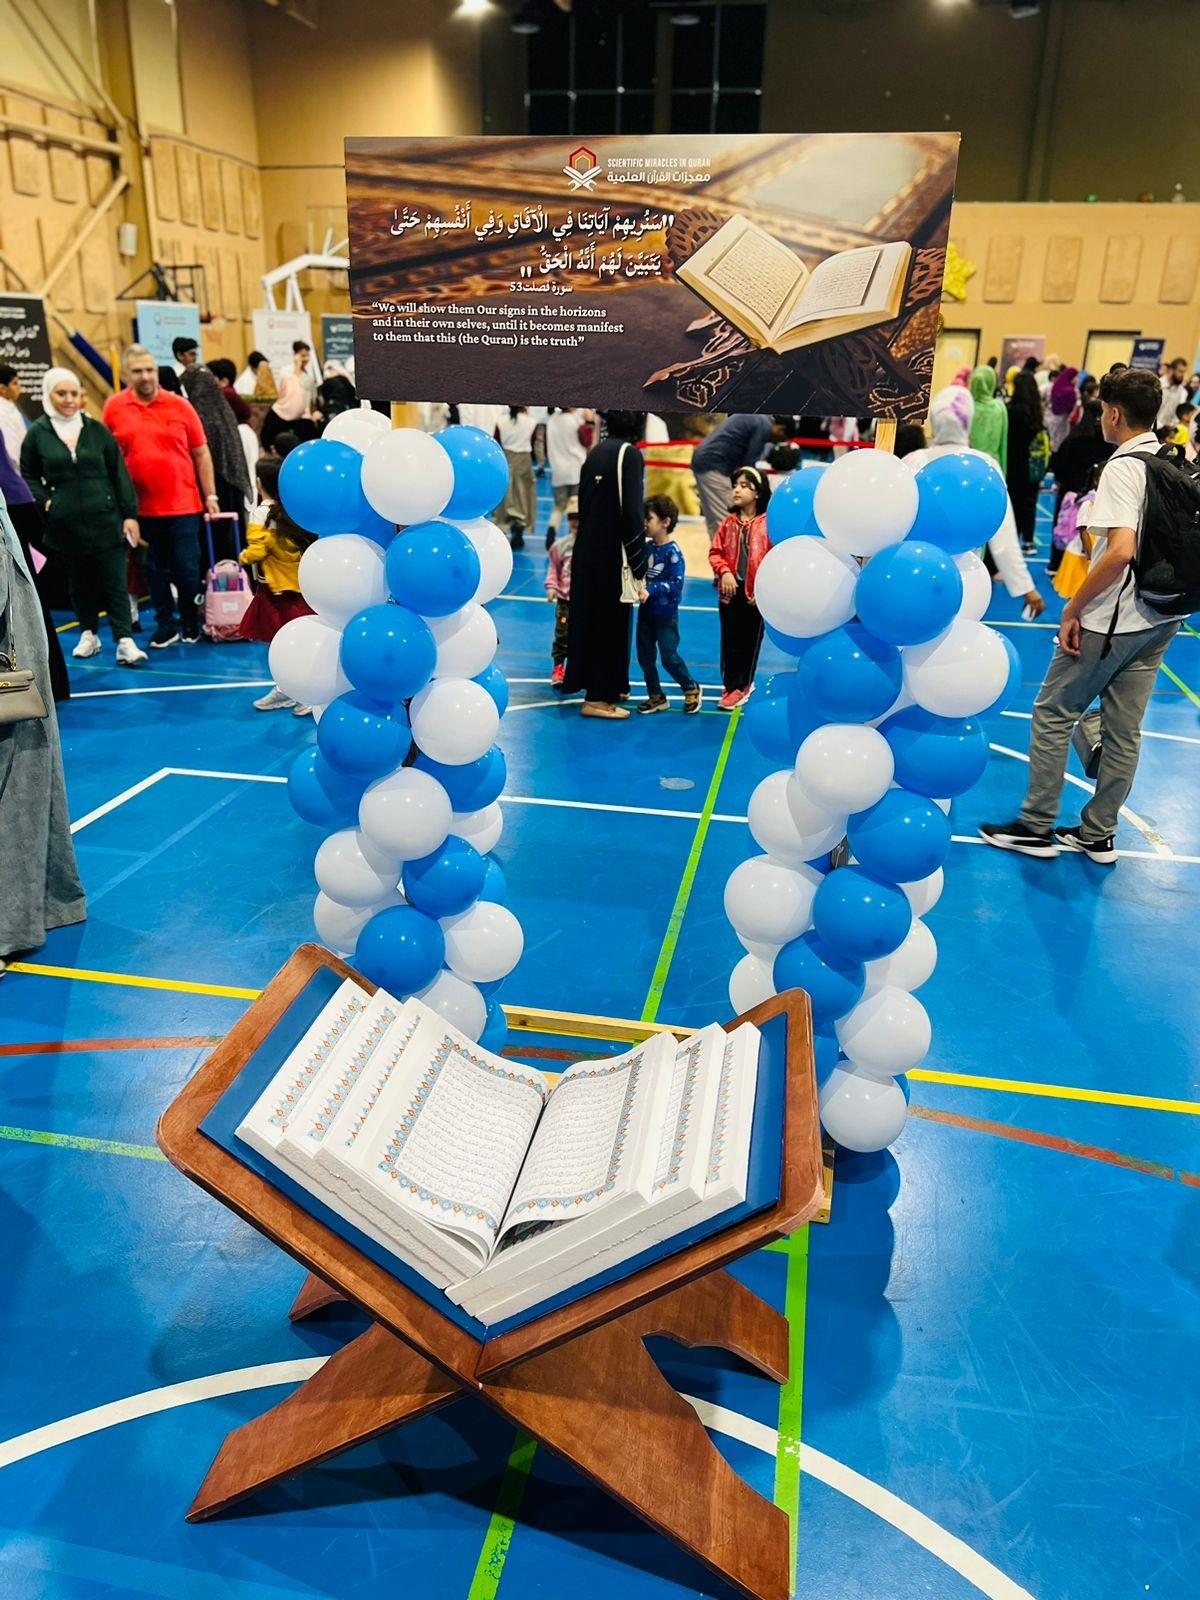 Scientific Miracles Of The Quran Exhibition